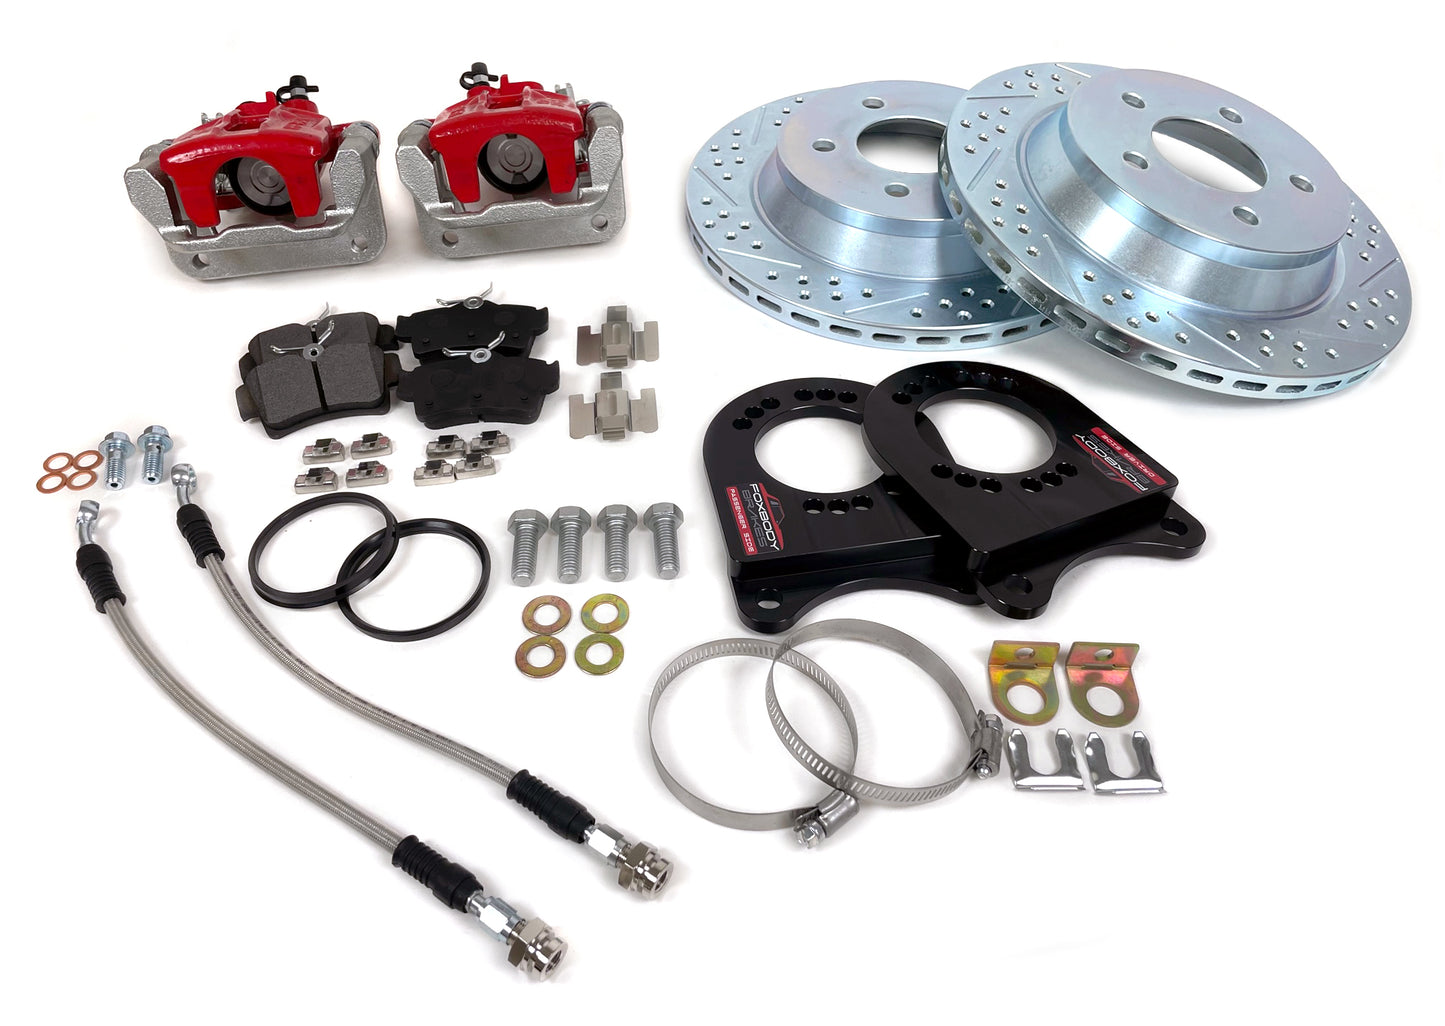 RED Rear Cobra Brake Kit for 8.8 with Fox Axle Length - Drilled, Slotted Rotors (5 lug)